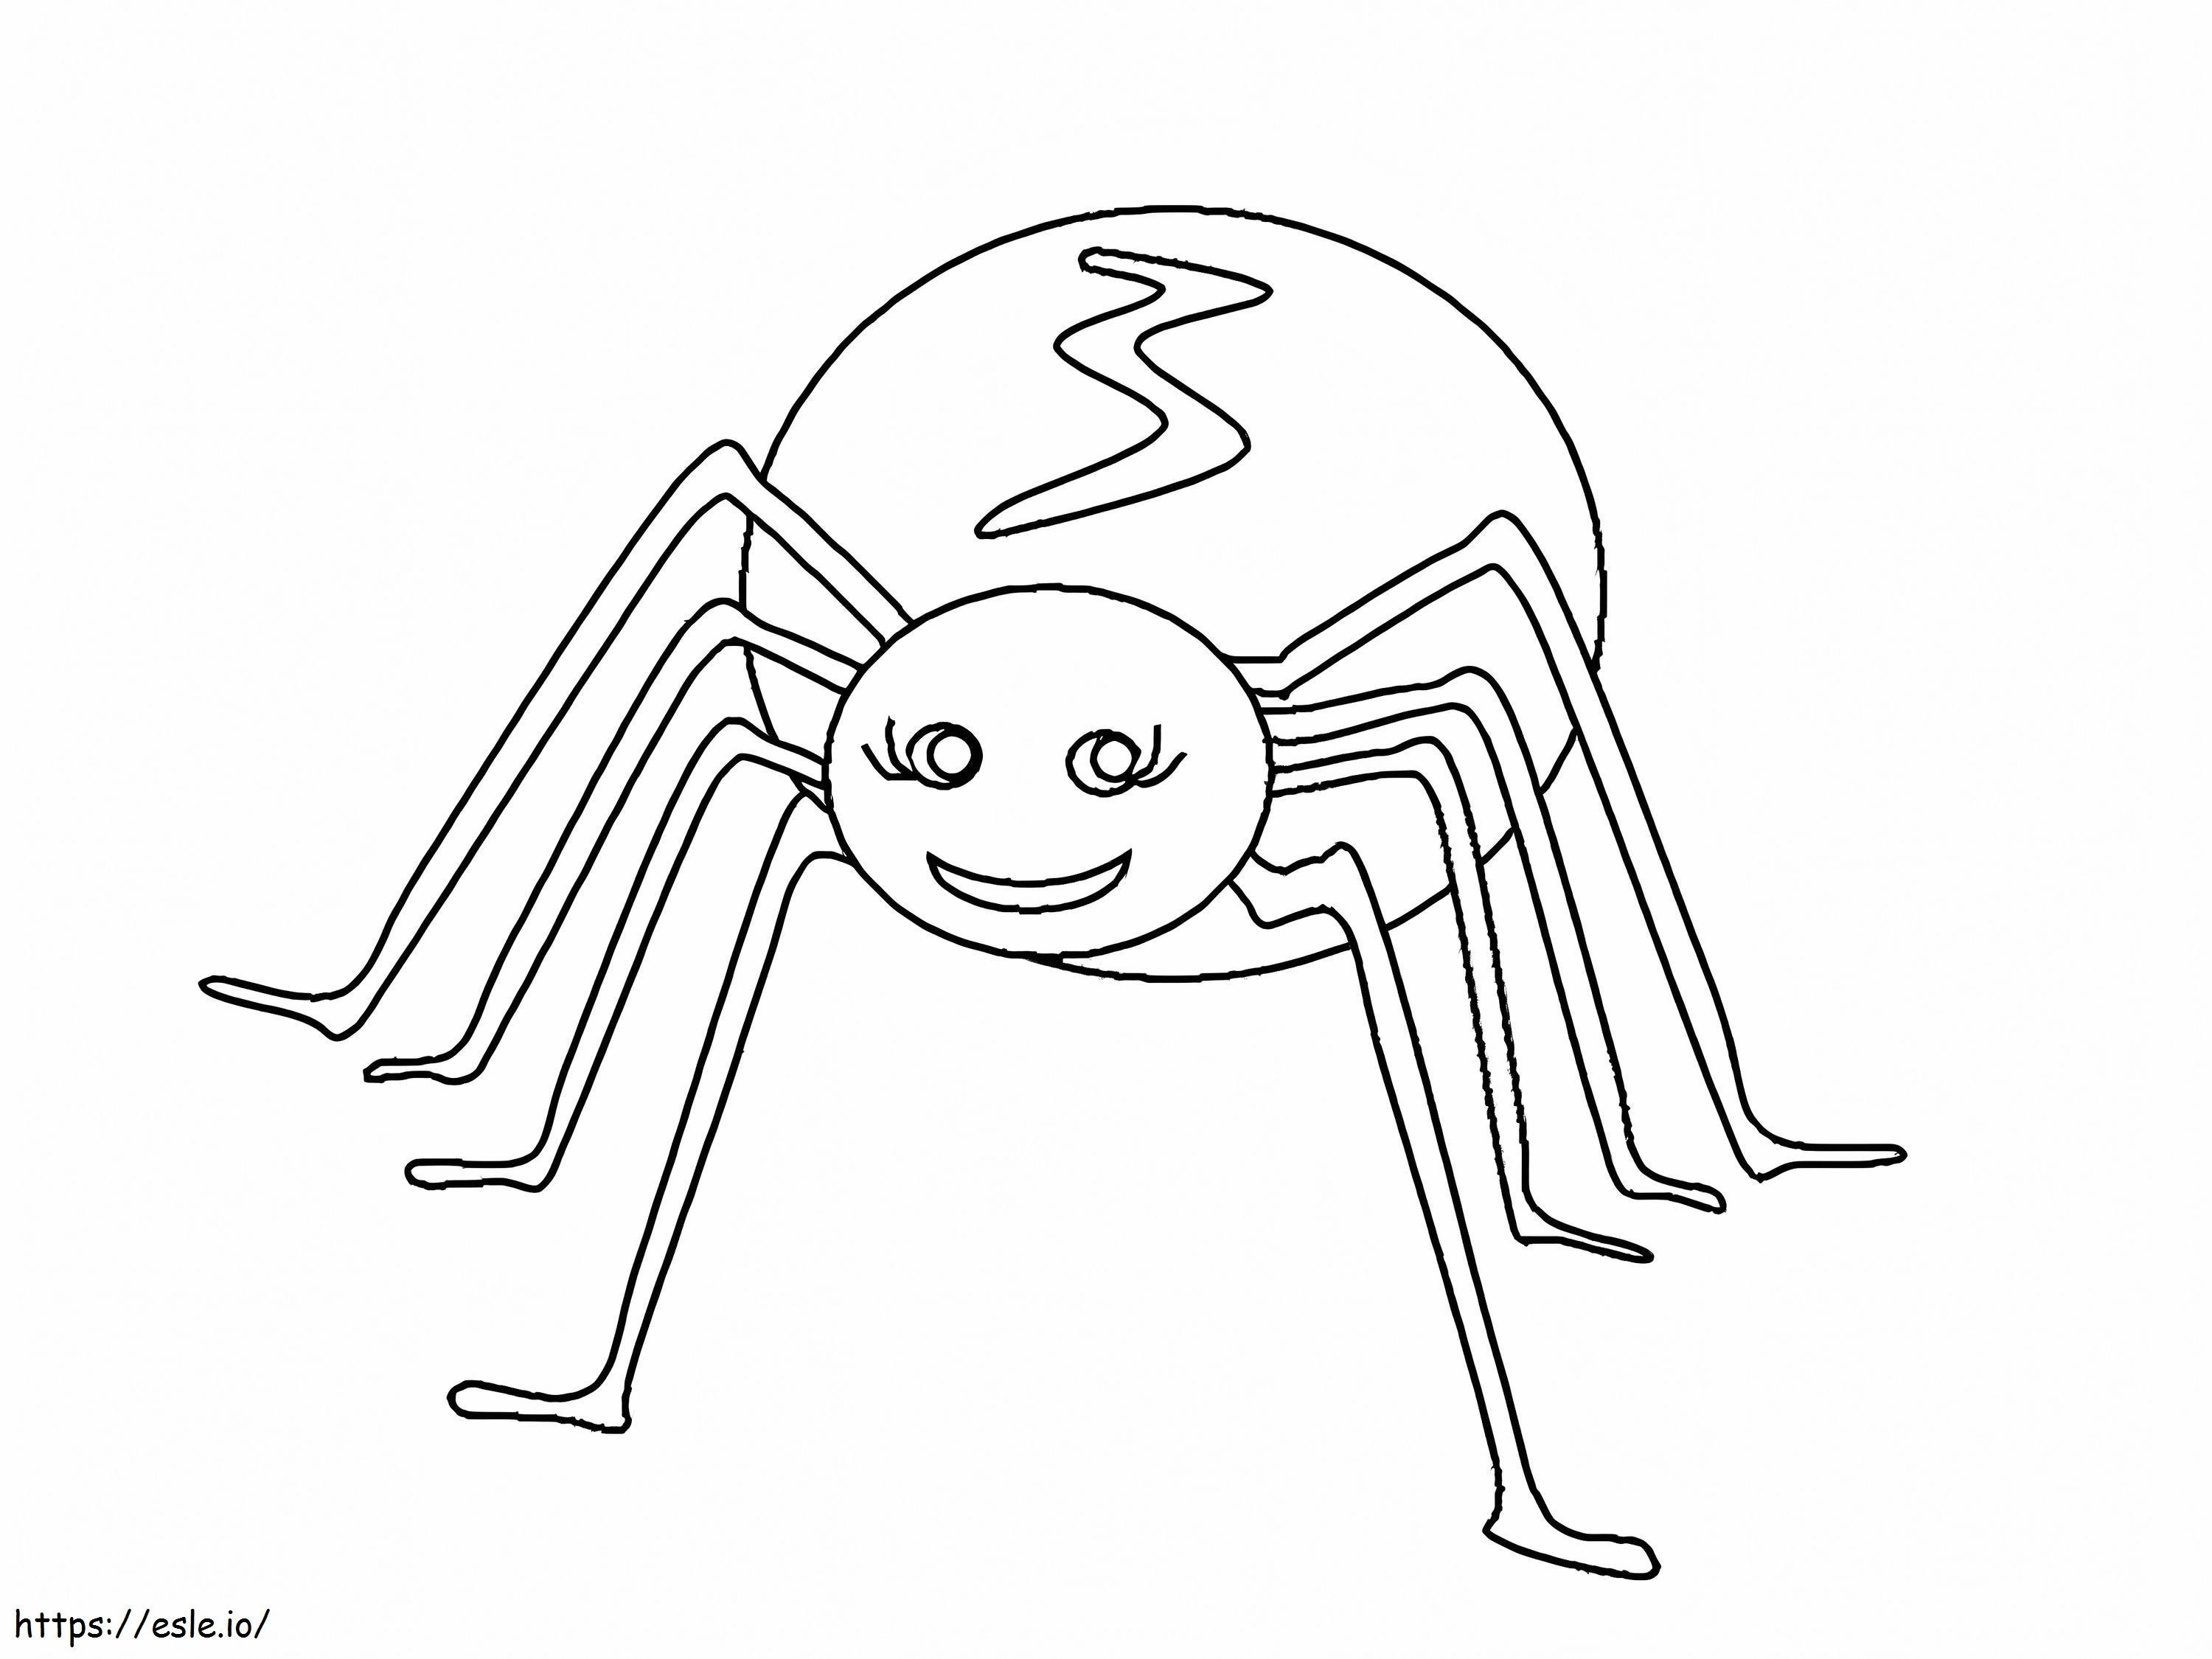 Cute Funny Spider coloring page